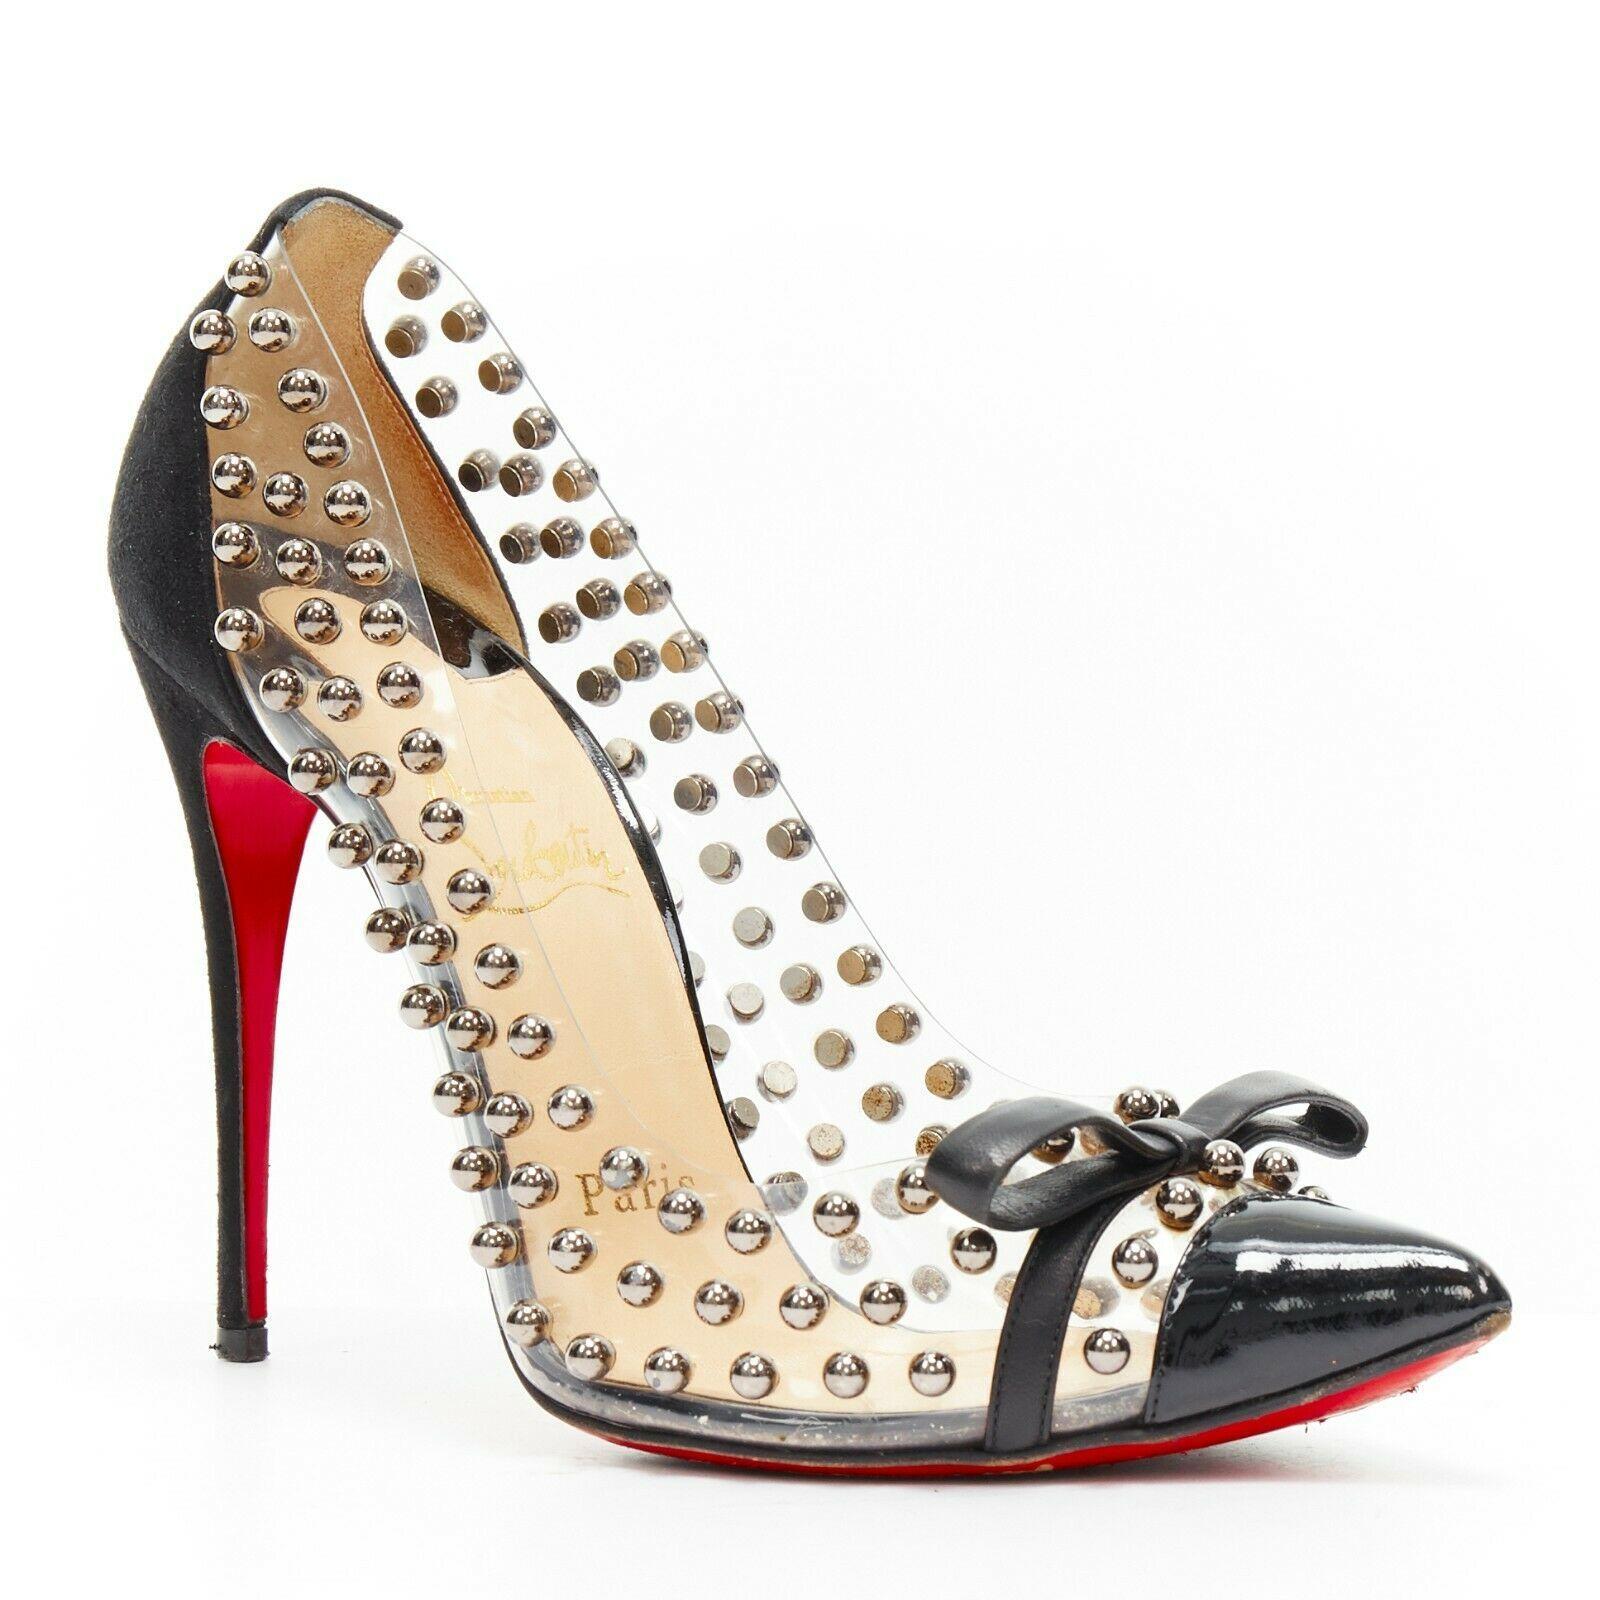 CHRISTIAN LOUBOUTIN Bille Et Boule 100 studded PVC bow patent pointy pump EU37.5
CHRISTIAN LOUBOUTIN
Bille et Boule. 
Black patent leather pointed toe. 
Clear PVC upper. 
Silver-tone rounded stud embellishment. 
Black leather bow detail at toe.